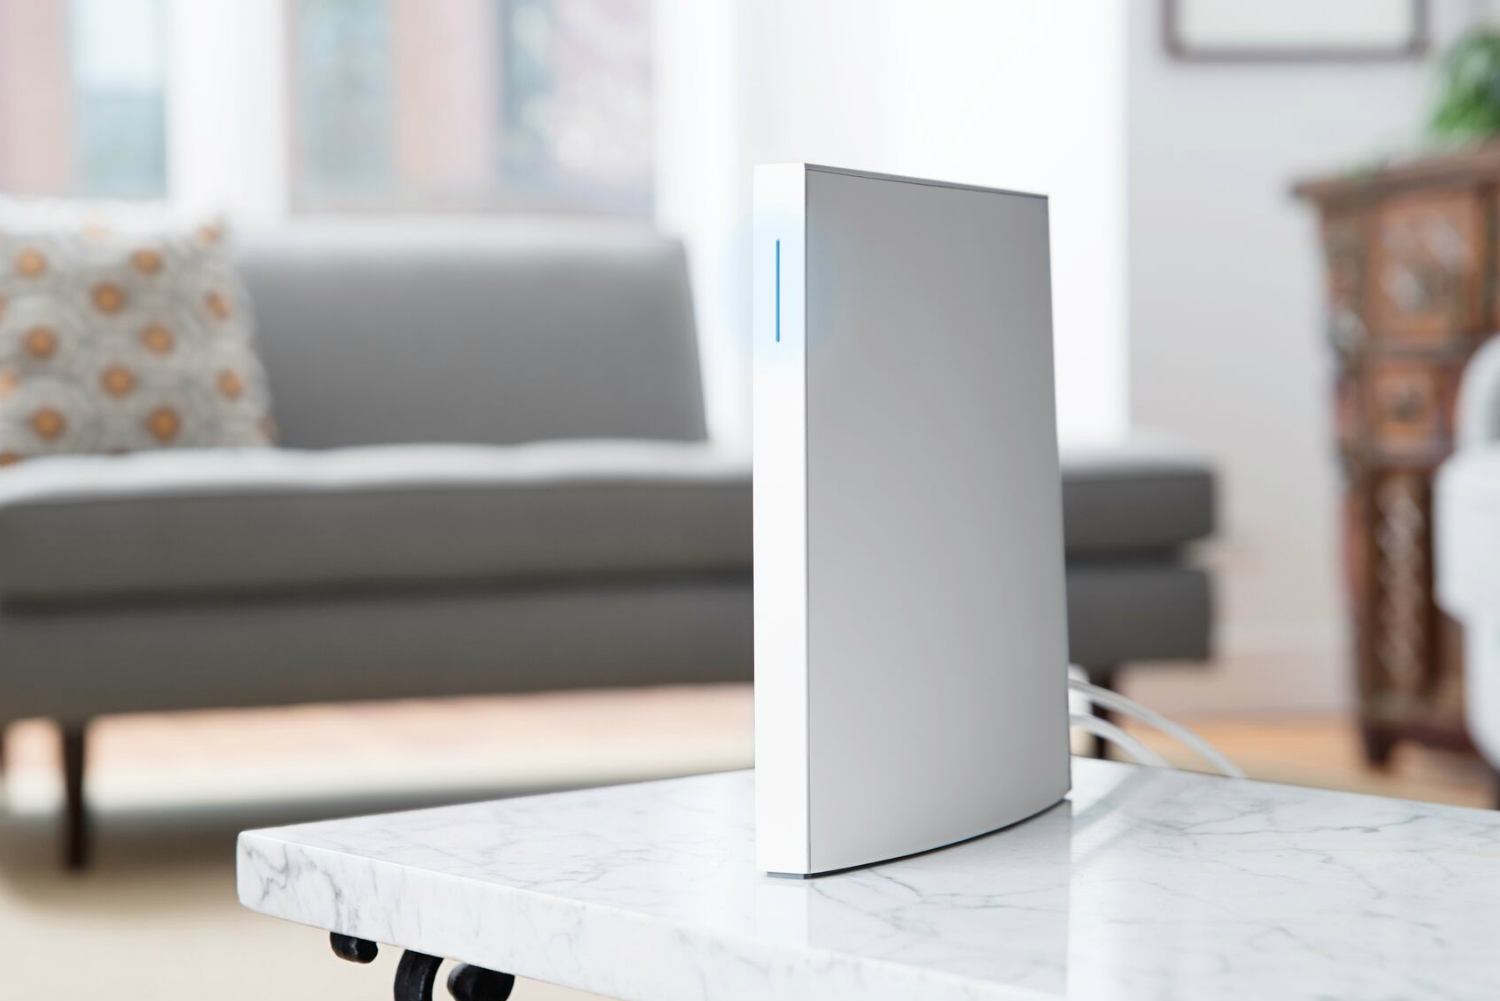 wink introduces its new 99 smart home hub 2 4